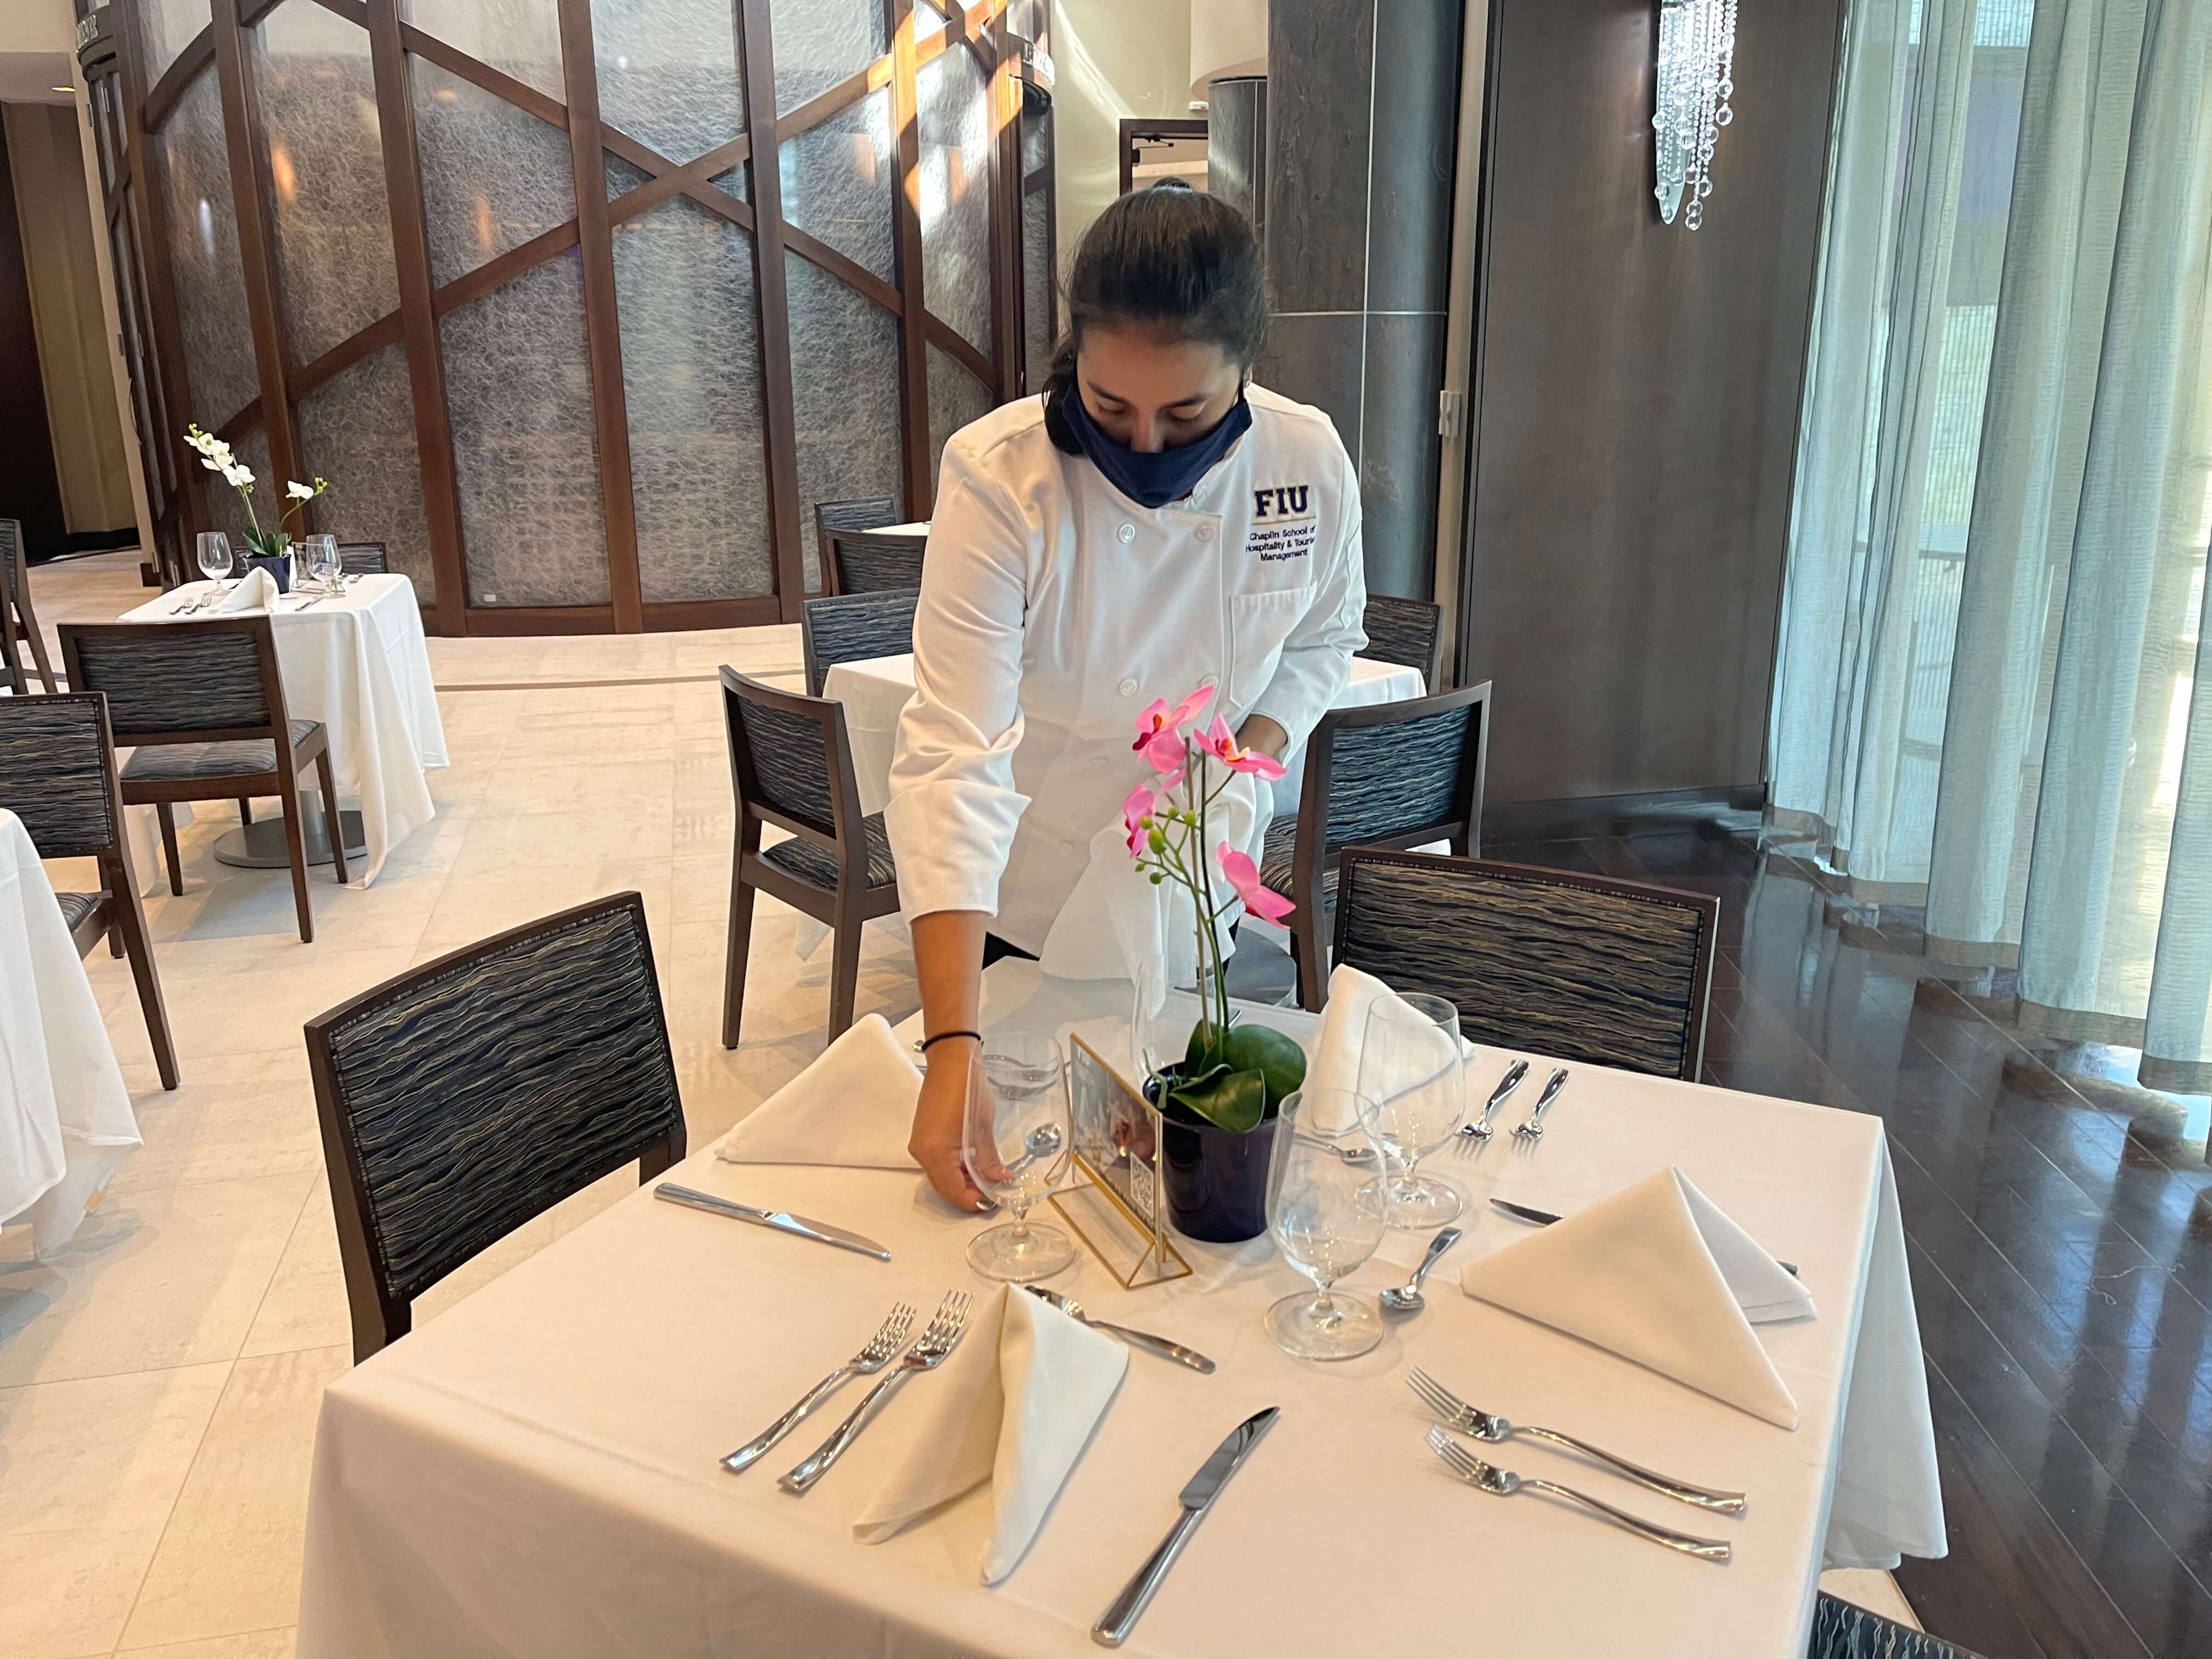 Hospitality student Maria Alonso, acting manager for the week, sets tables and makes sure silverware is polished.